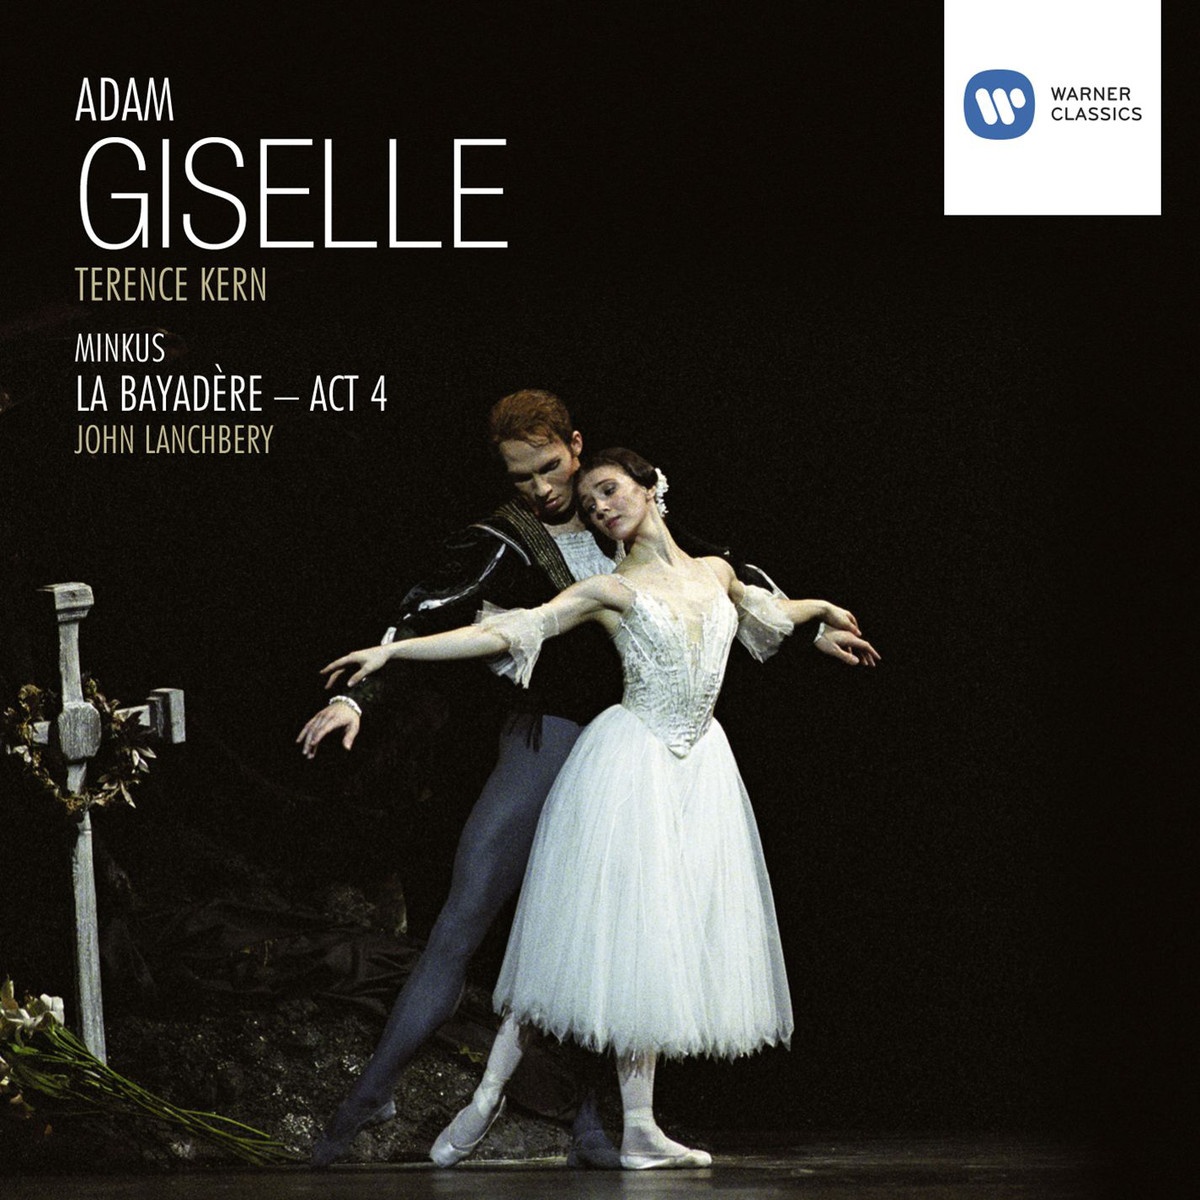 Giselle (1996 Digital Remaster), Act II: No.13 Albrecht appears